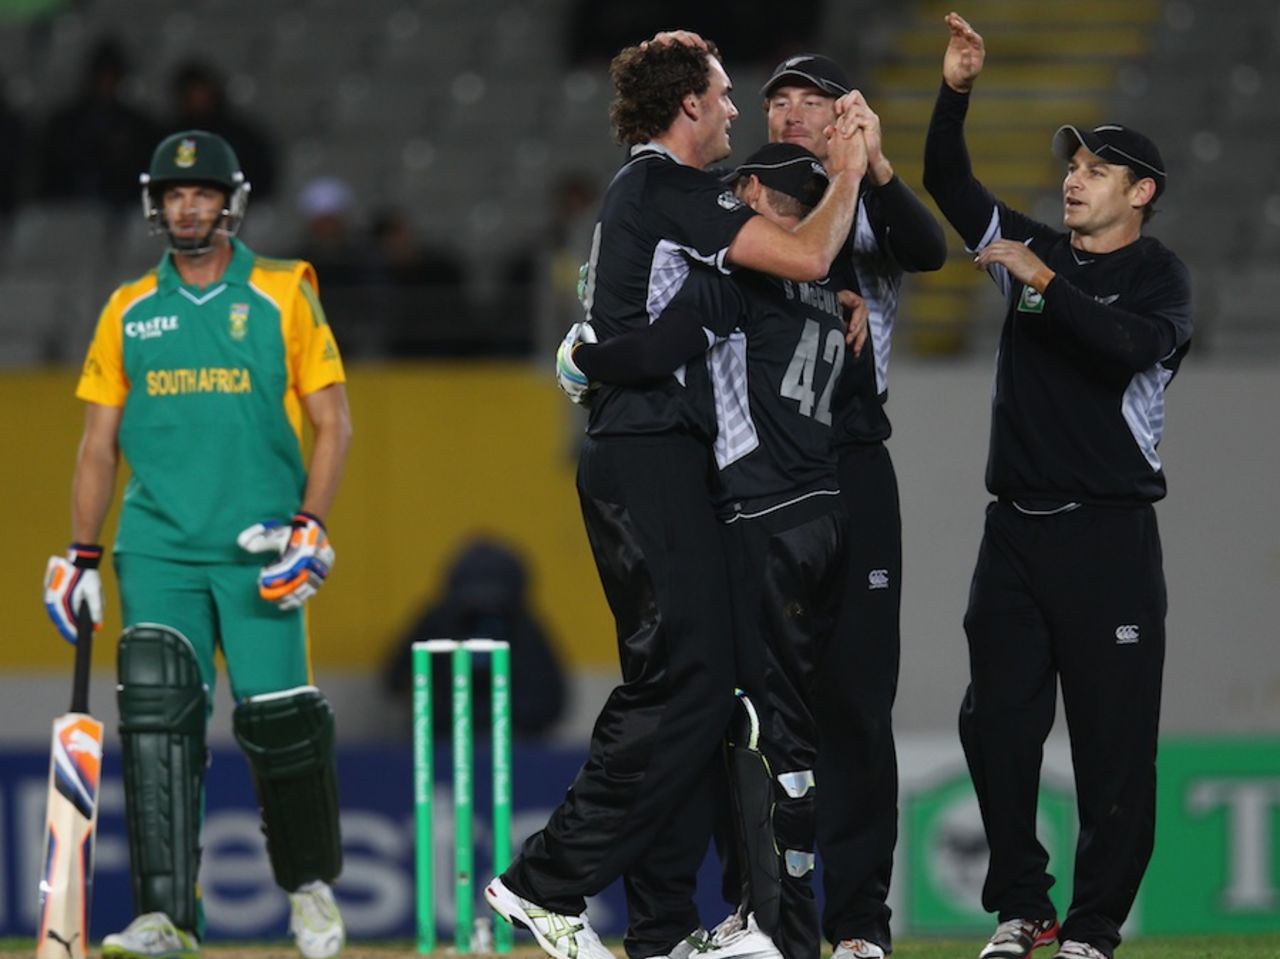 Kyle Mills celebrates his 200th ODI wicket, that of Hashim Amla, New Zealand v South Africa, 3rd ODI, Auckland, March 3, 2012